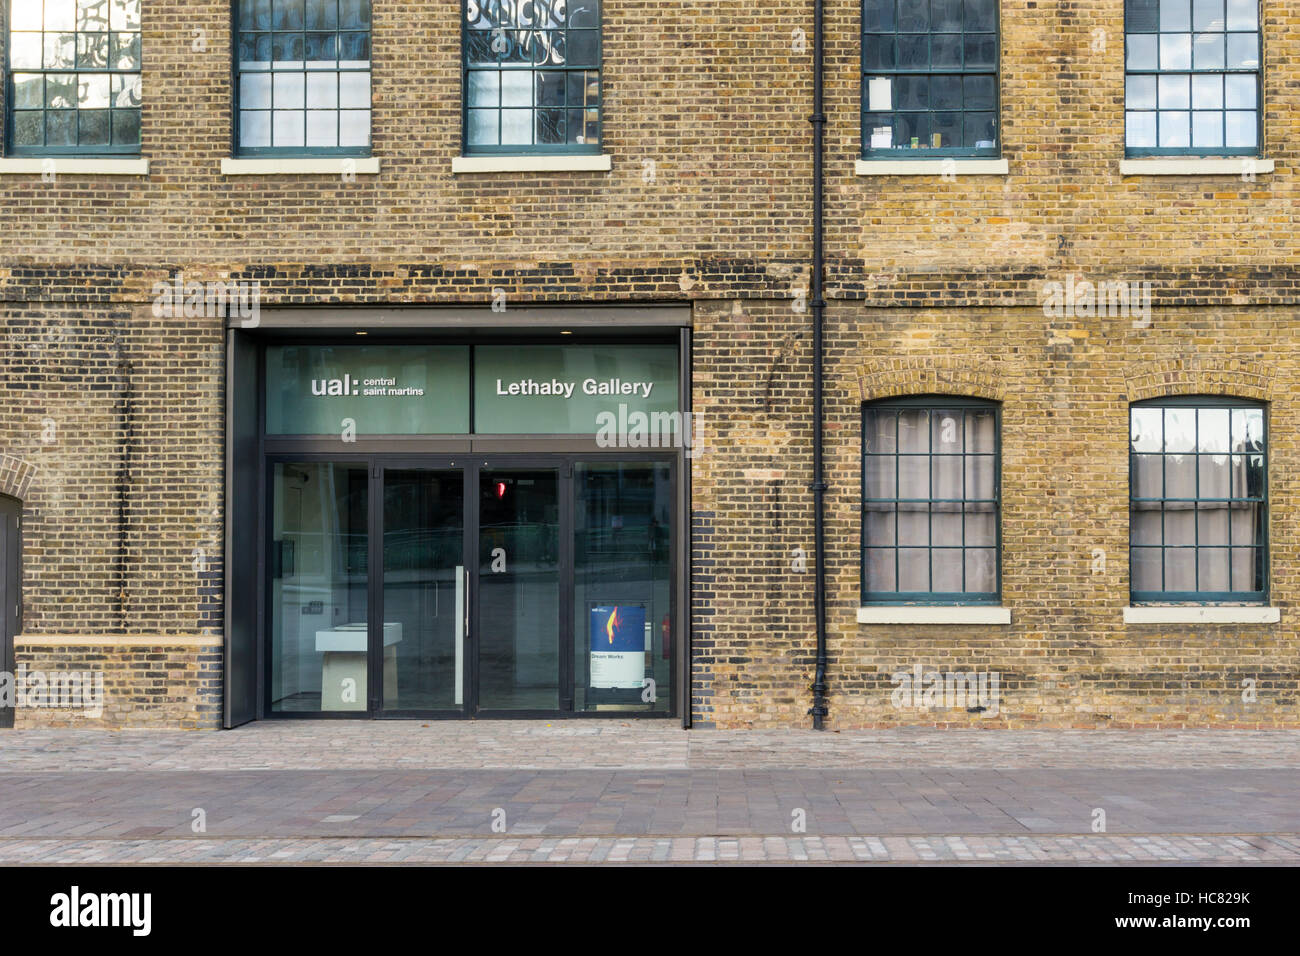 University of the Arts London, Central Saint Martins Lethaby Gallery in Granary Square at King's Cross, London. Stock Photo